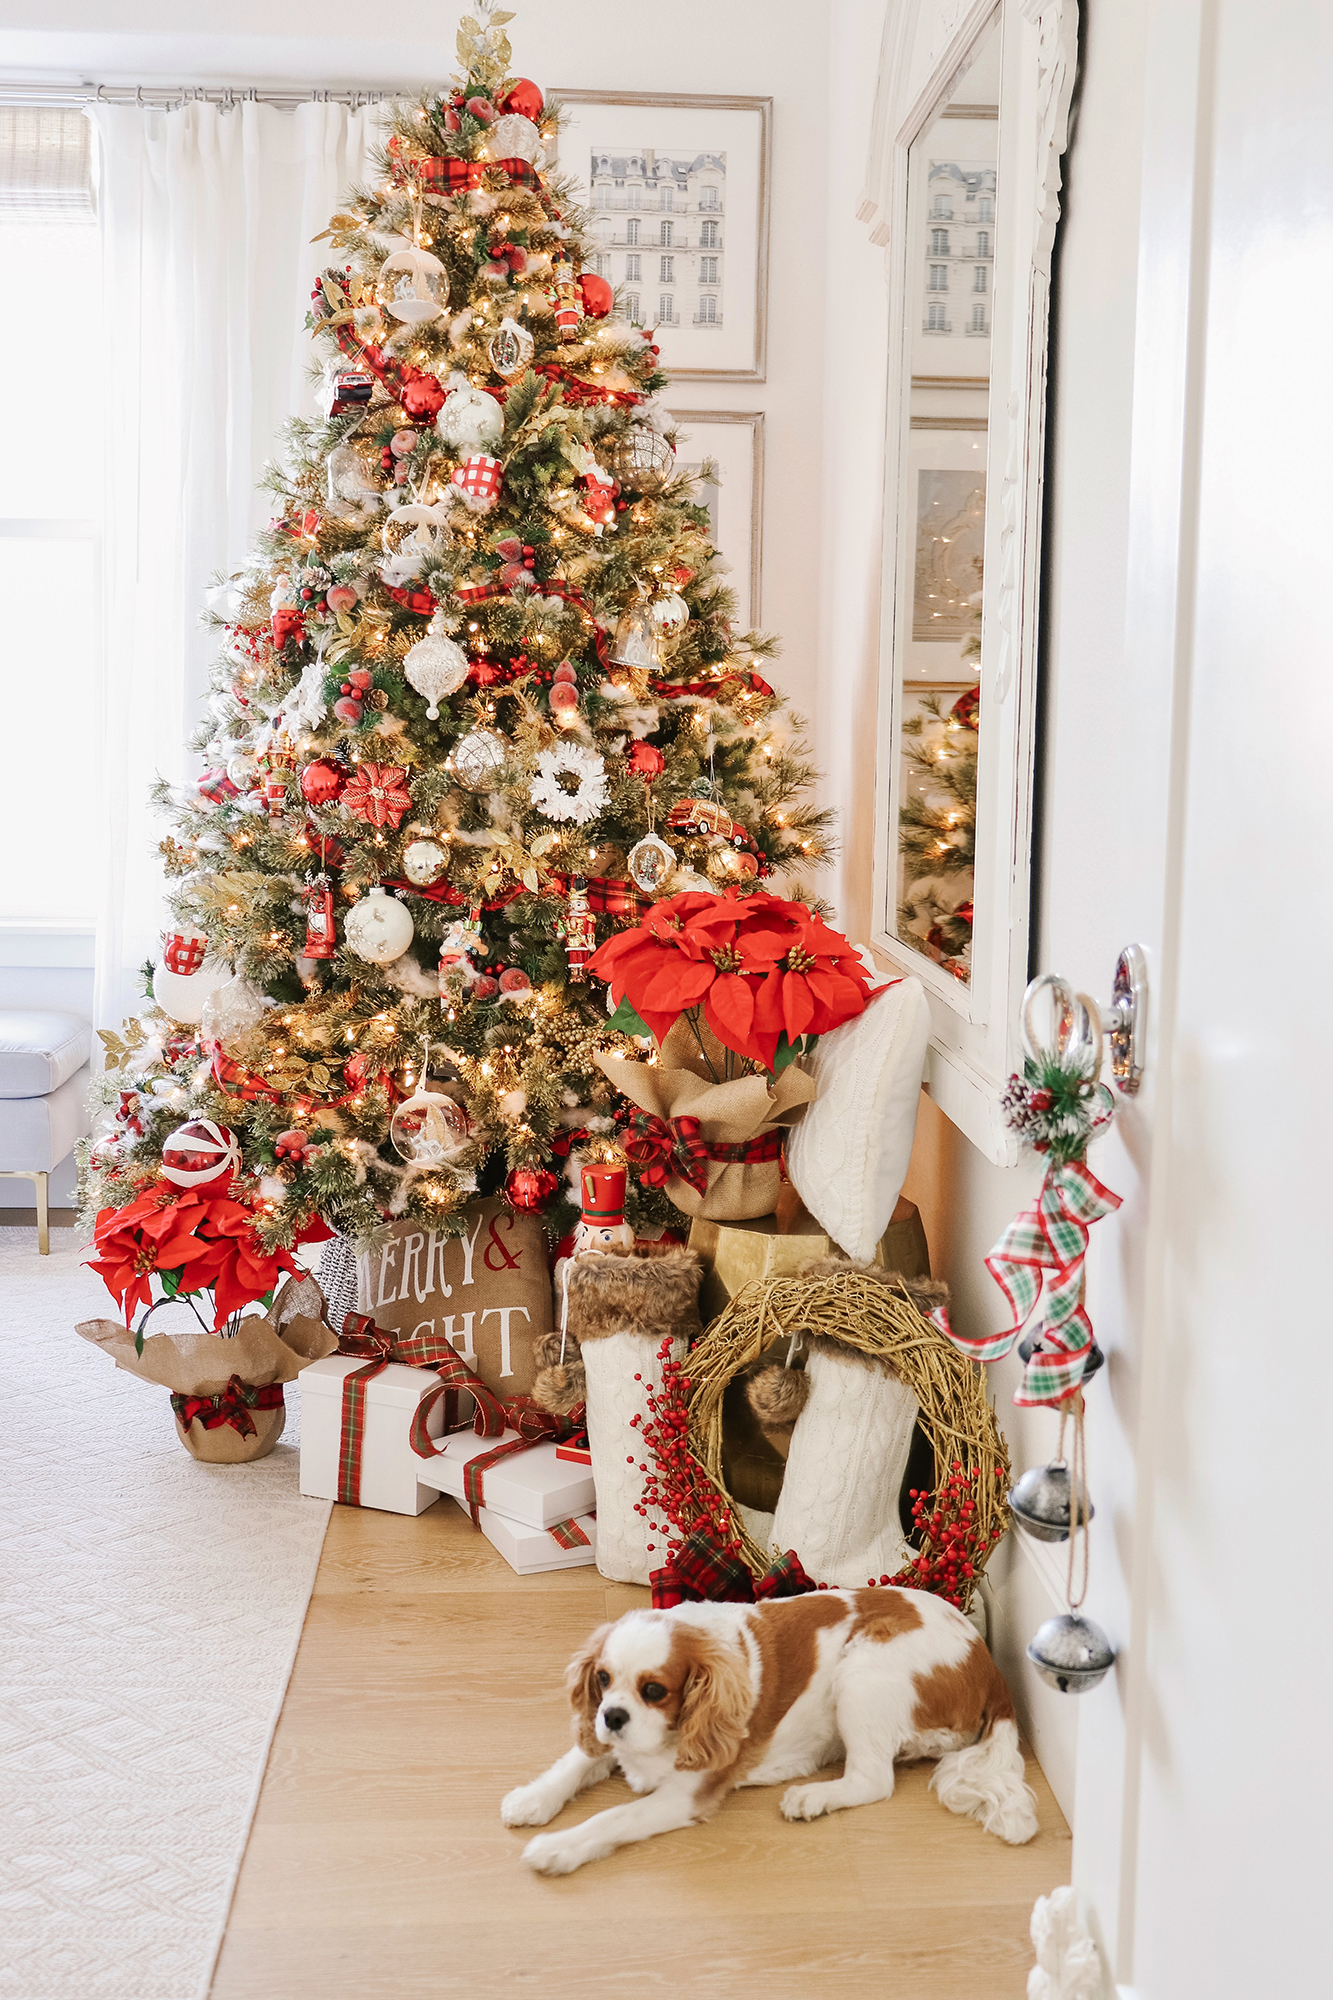 Red & White New England Style Christmas Tree - Traditional yet modern with pops of red, white and gold. Affordable and elegant for 2019 holiday decor